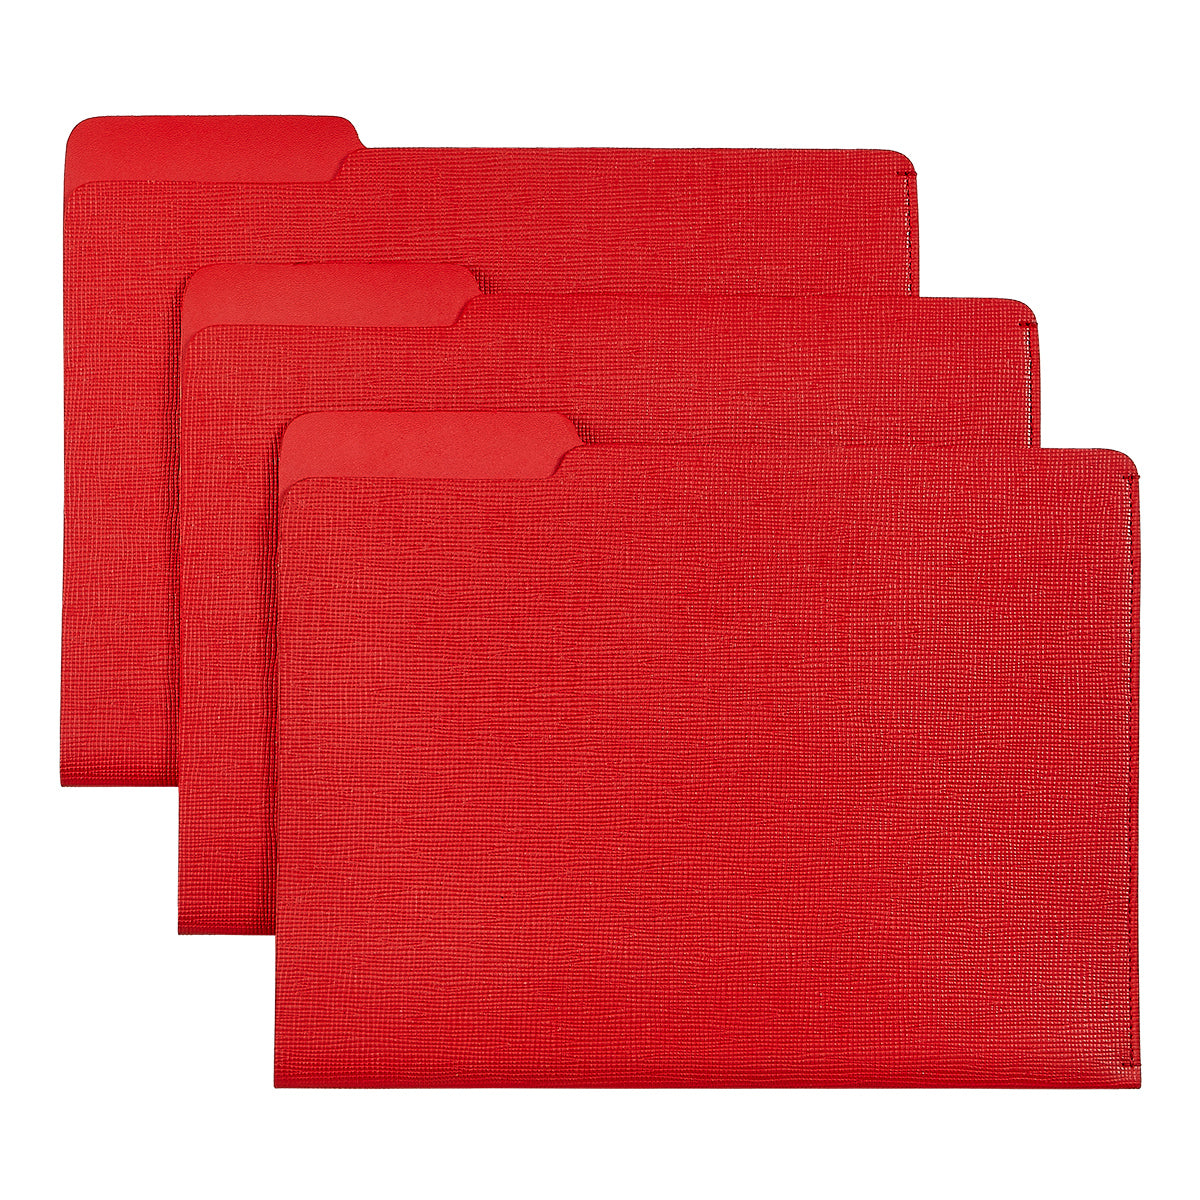 Graphic Image Carlo File Folder Red Two Sided Croix Leather